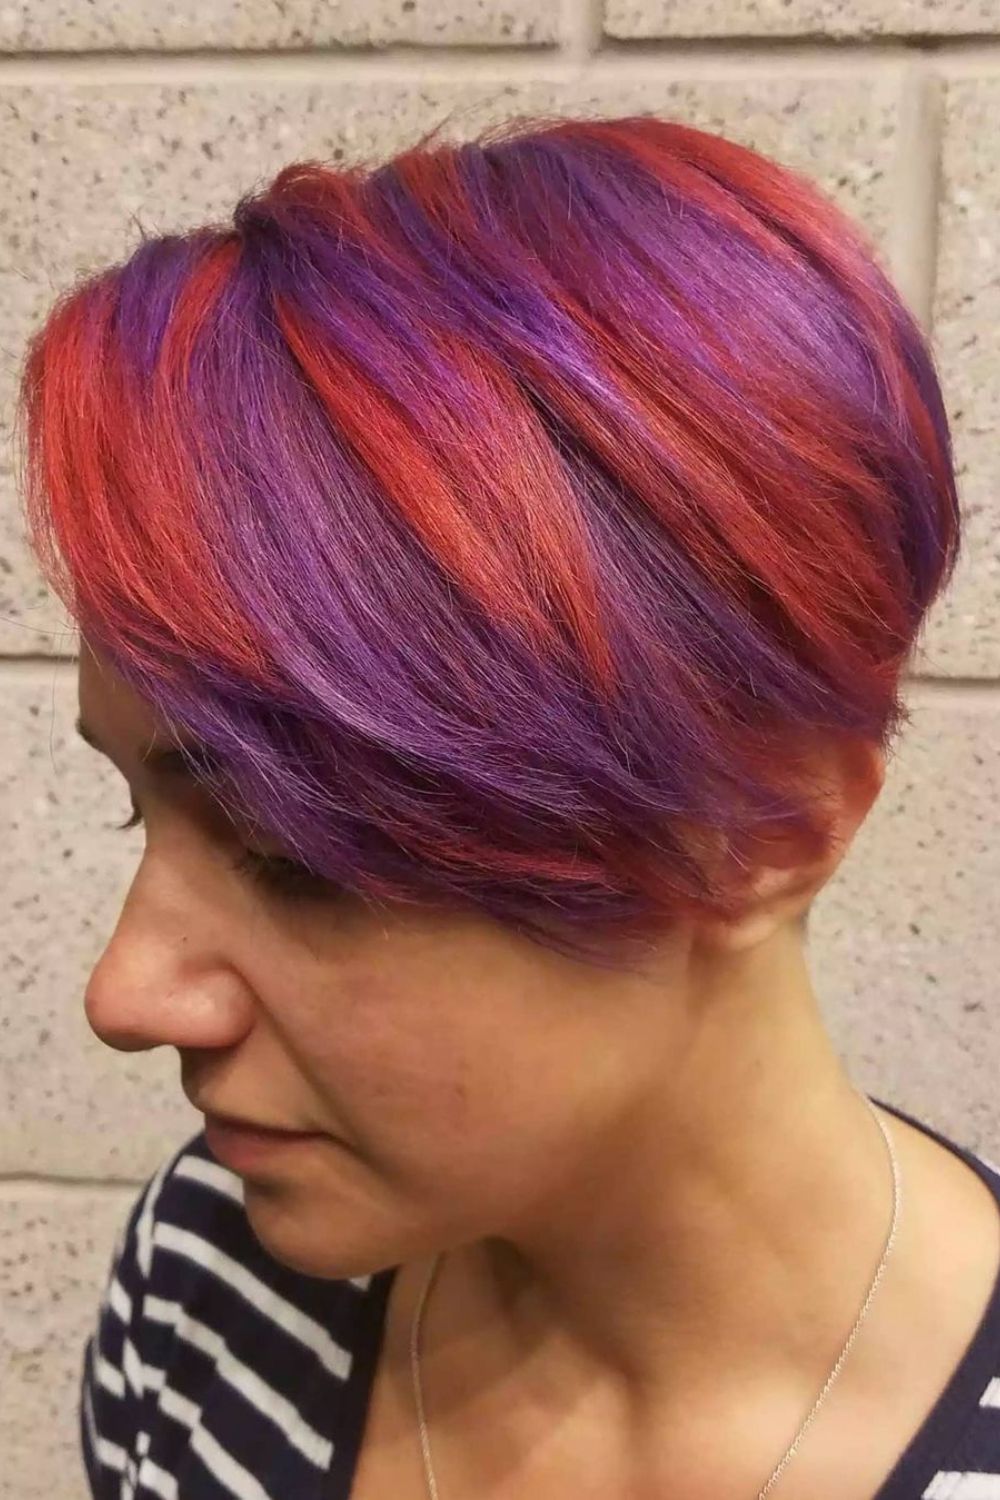 A woman with short hair with a purple and red hair color spray.